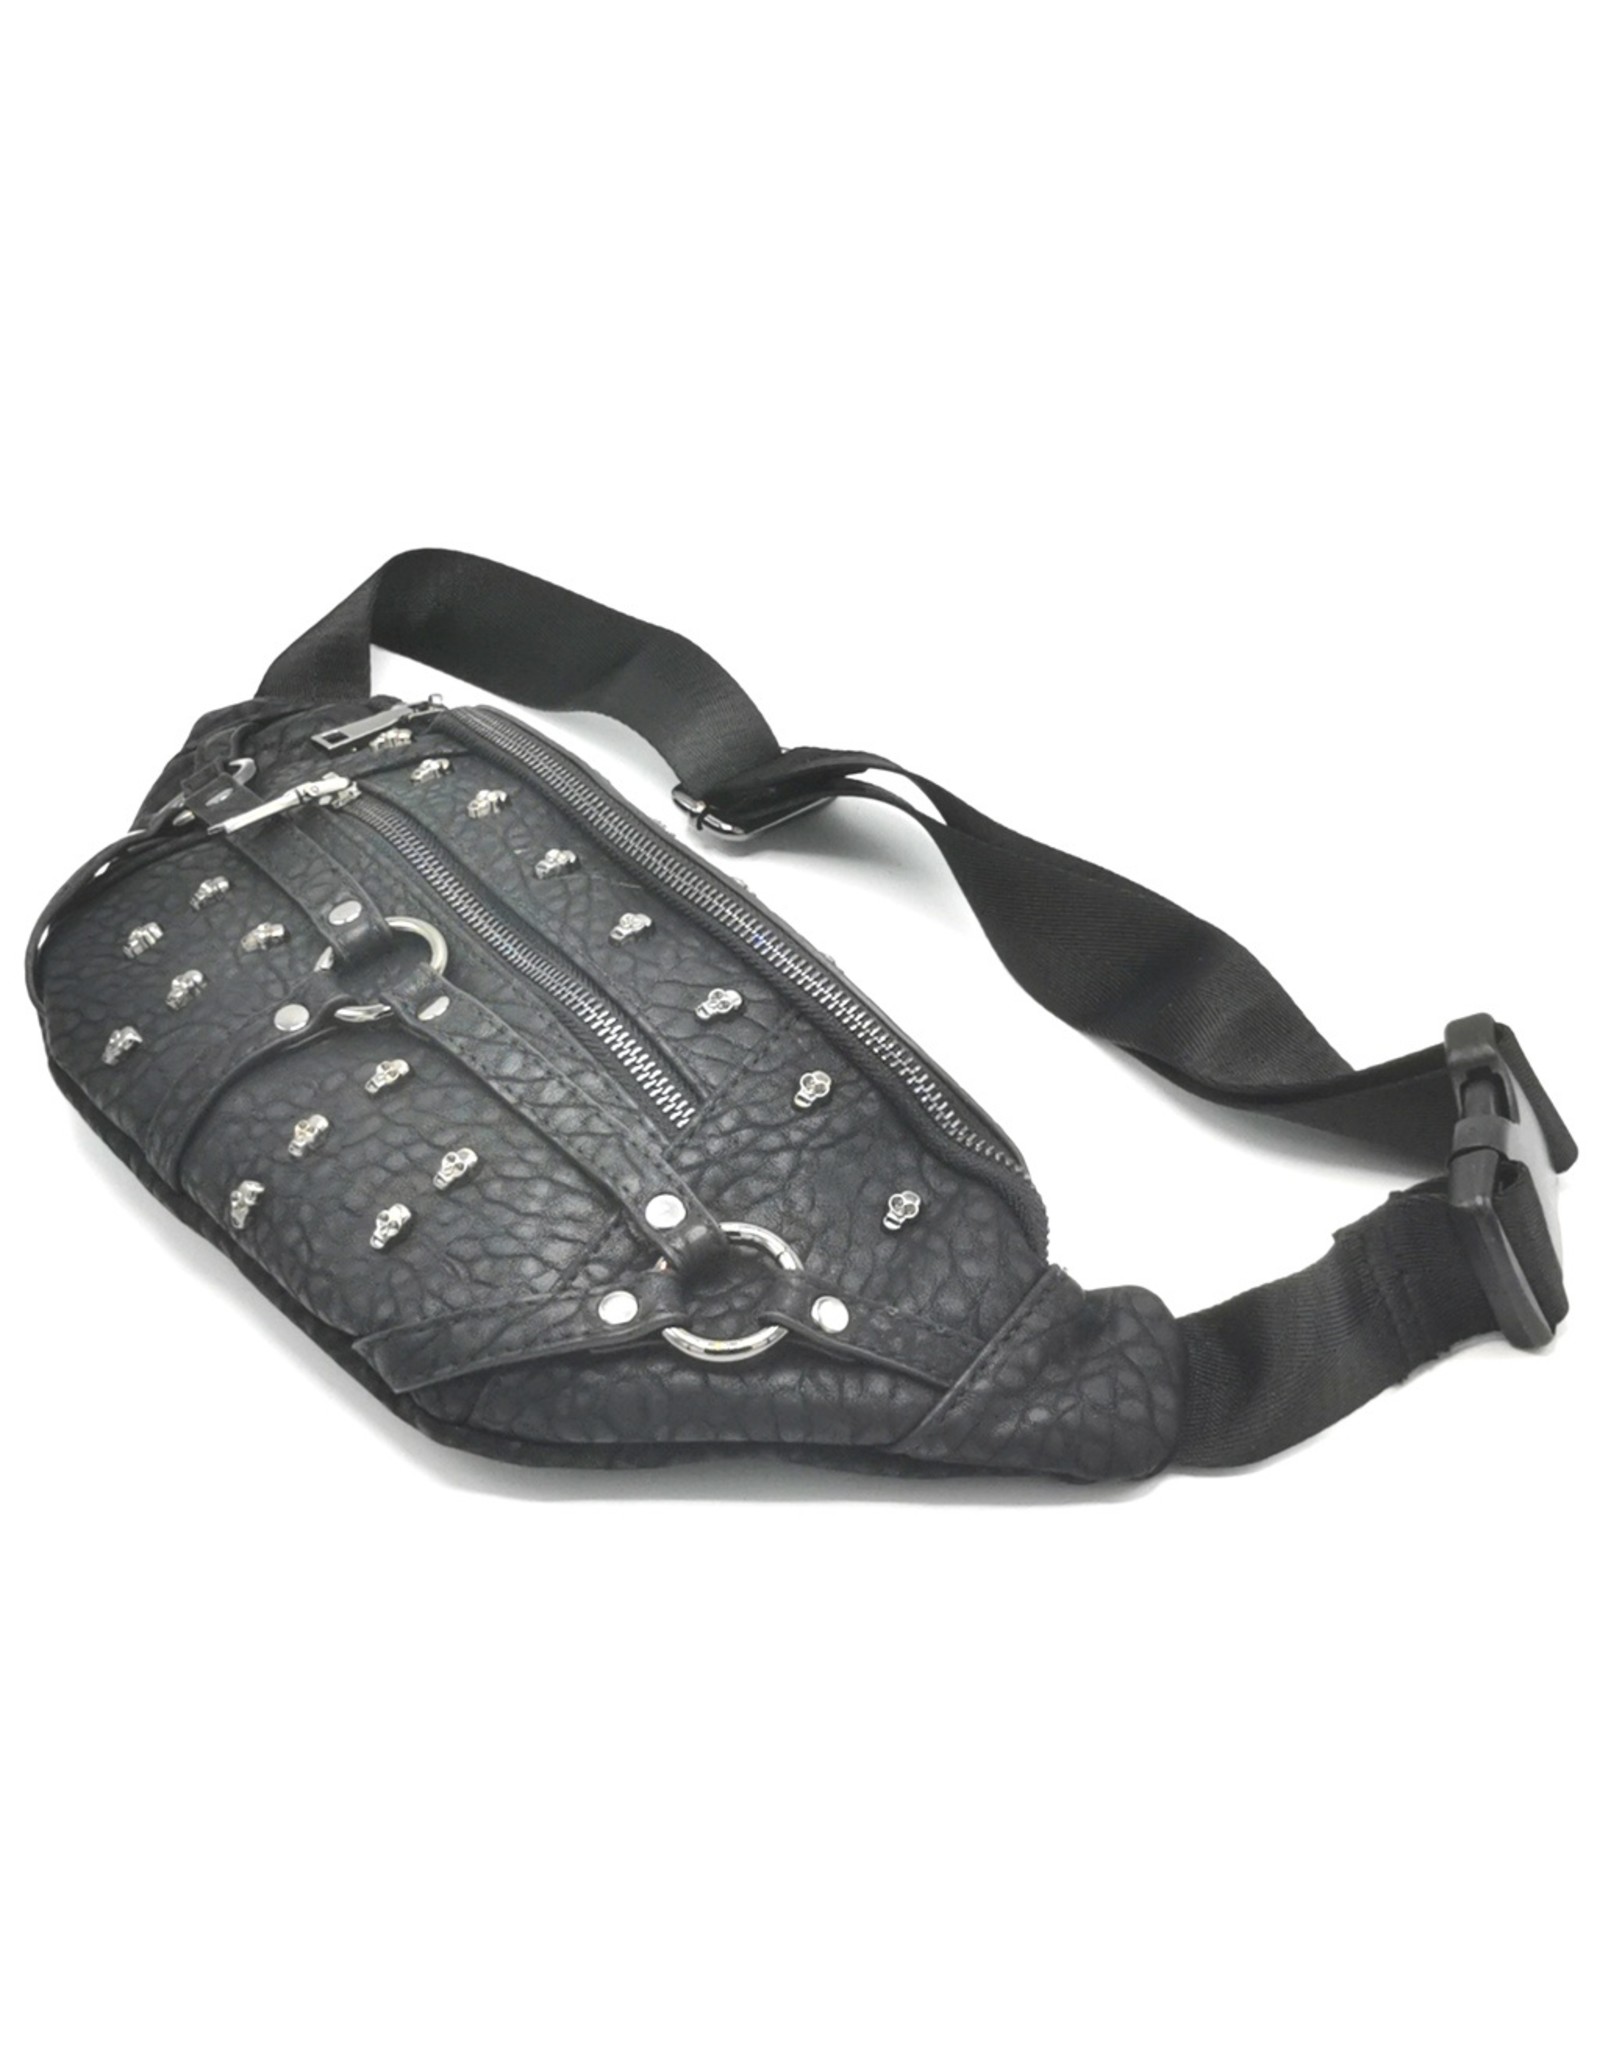 Dark Desire Gothic bags Steampunk bags - Gothic waist bag with small metal skulls